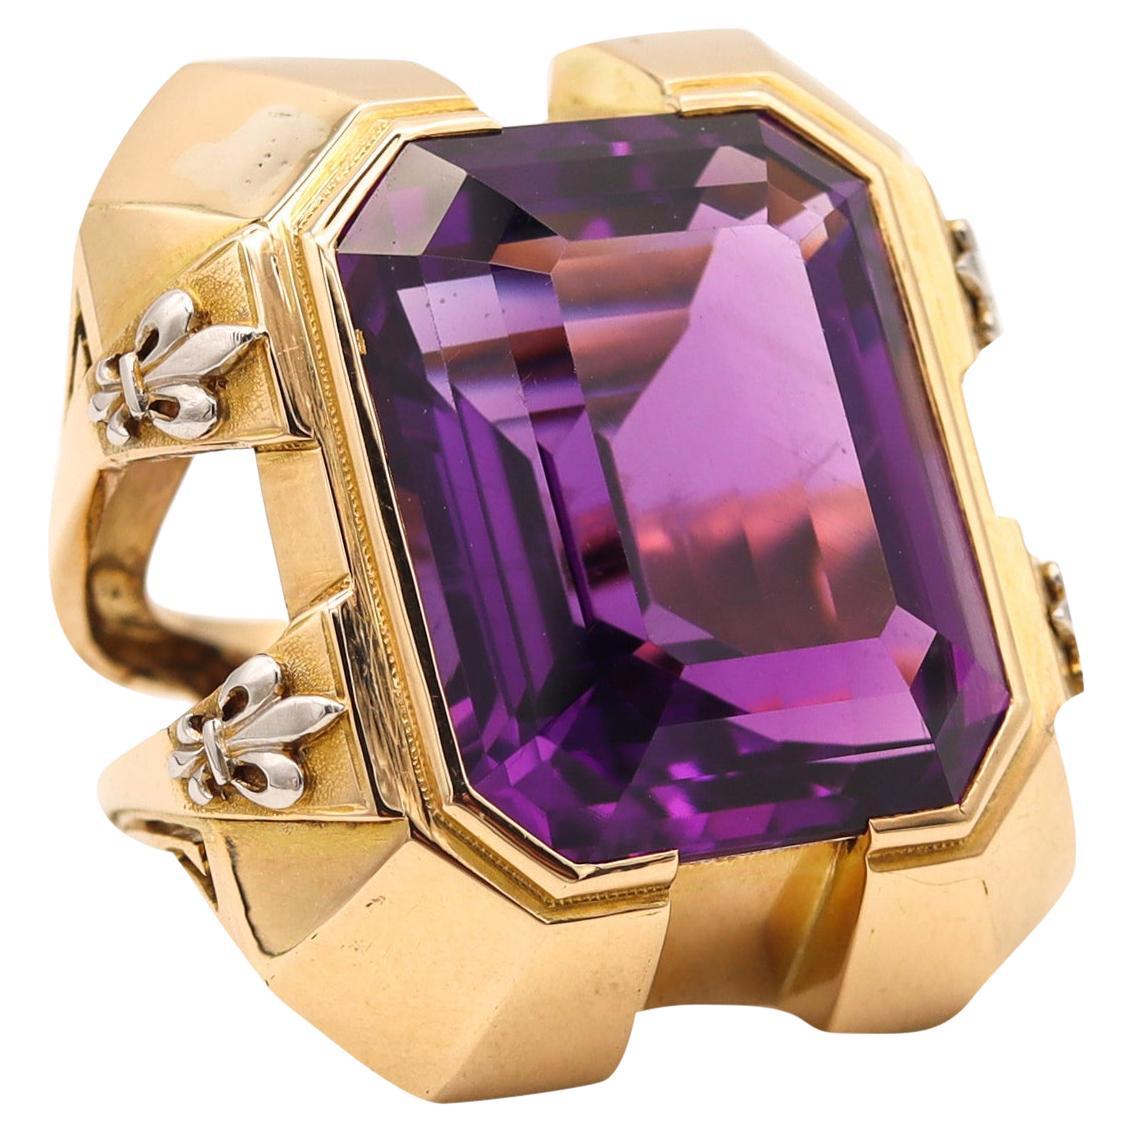 Marchak Paris 1930 Art Deco Geometric Ring In 18Kt Gold With 42.84 Cts Amethyst For Sale